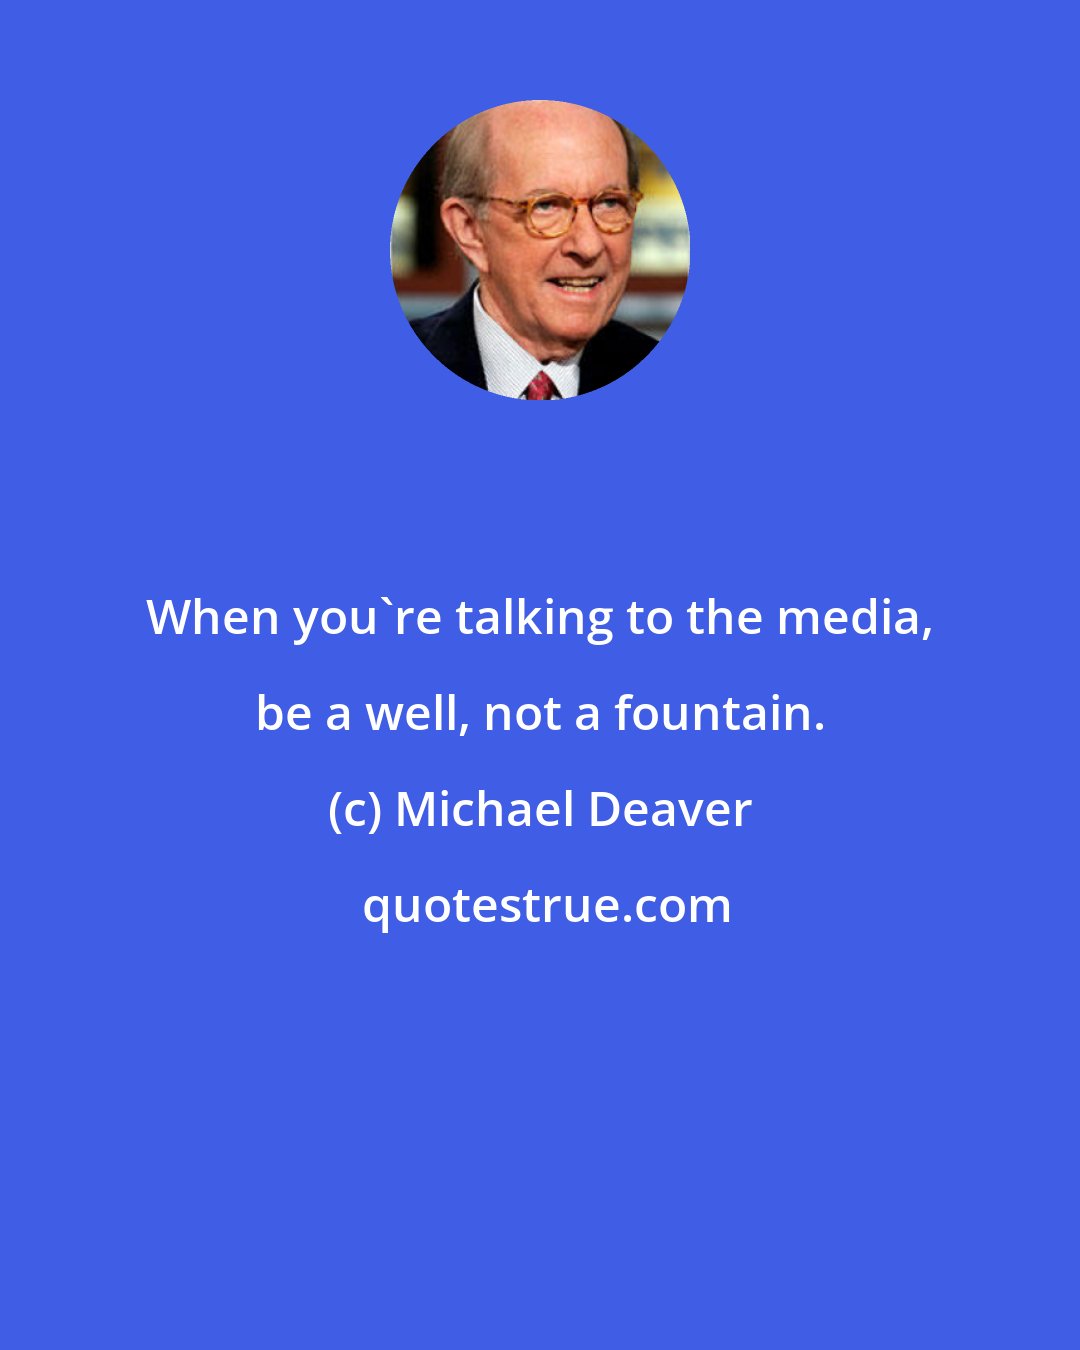 Michael Deaver: When you're talking to the media, be a well, not a fountain.